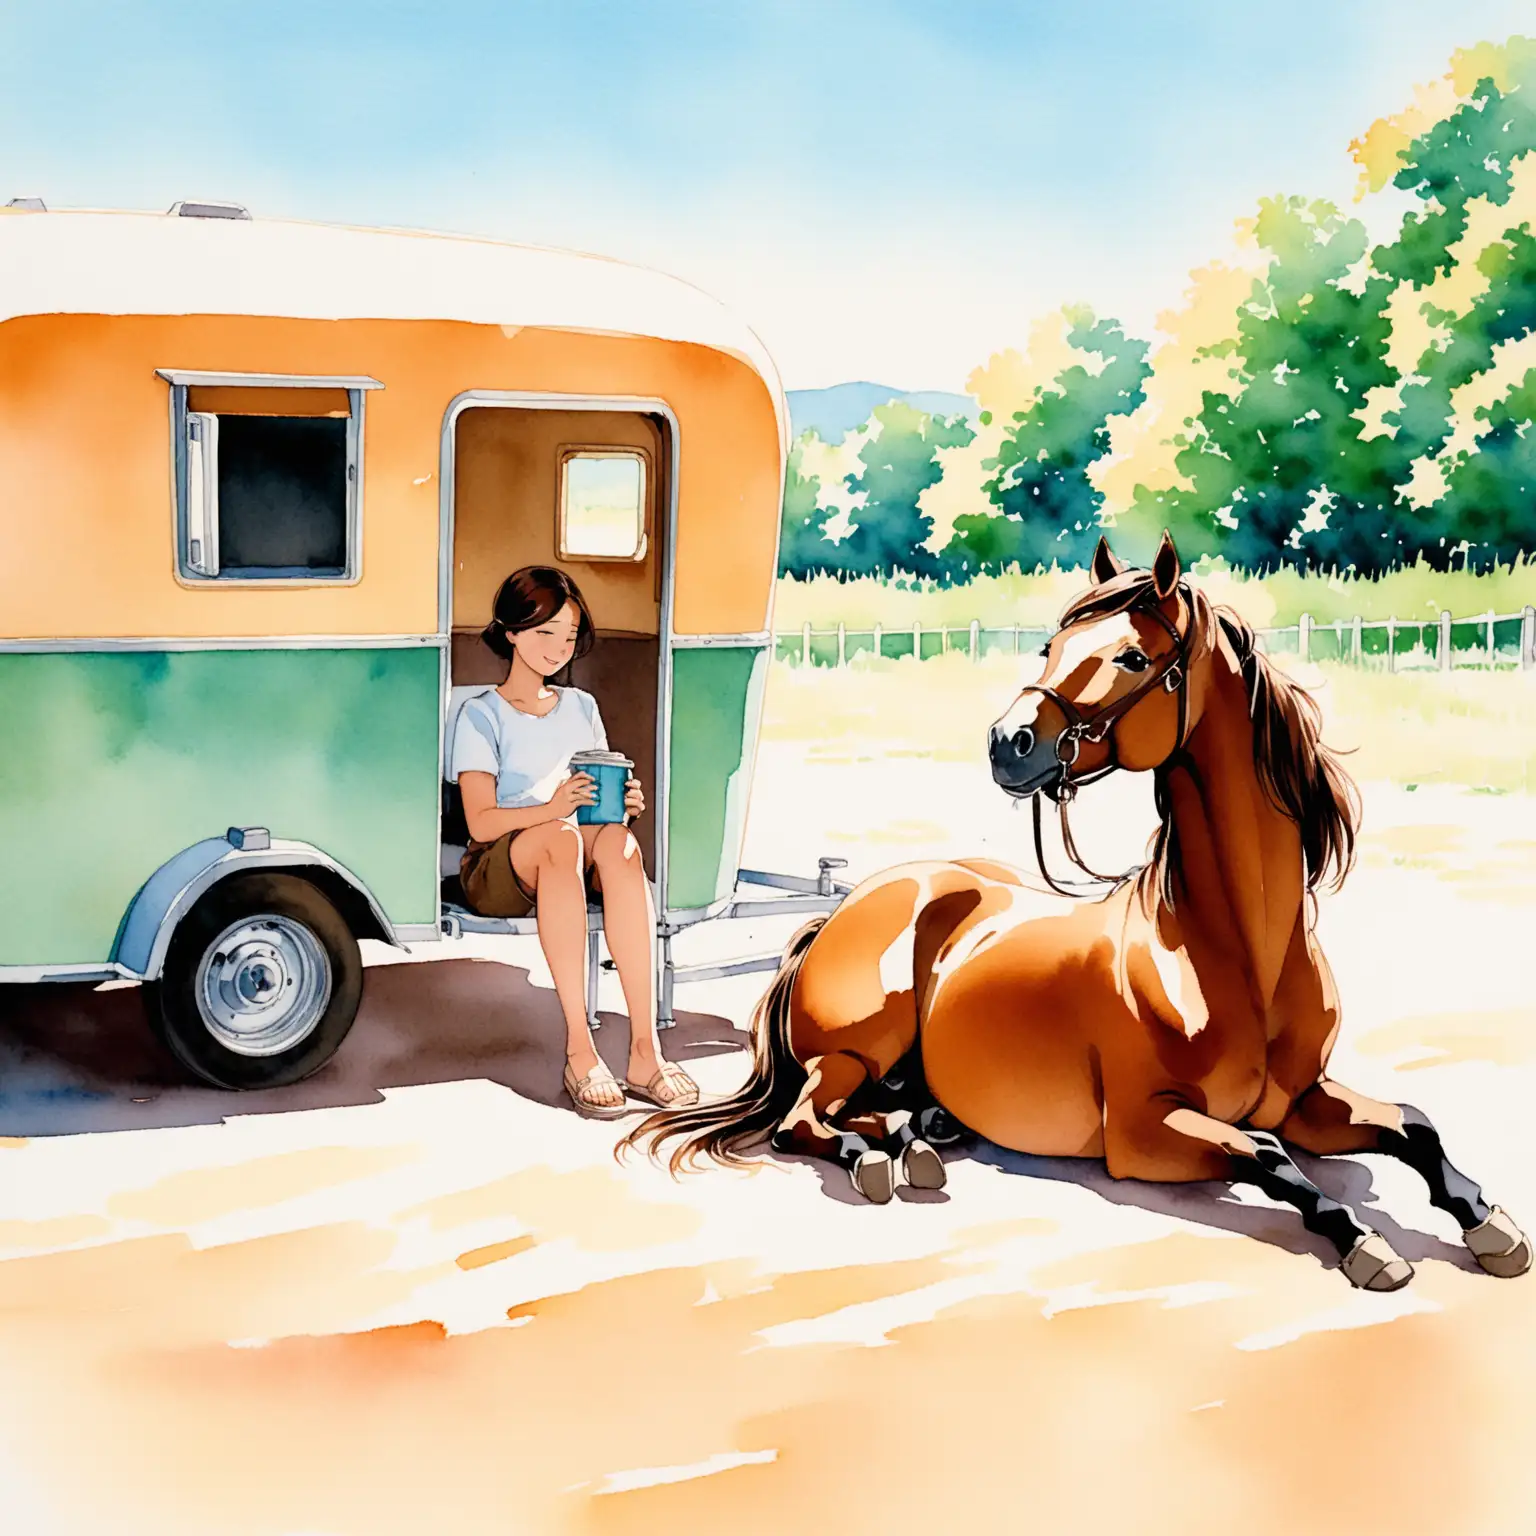 Sunny Days with a Brown Pony and Owner WatercolorStyle 35mm Film Adventure